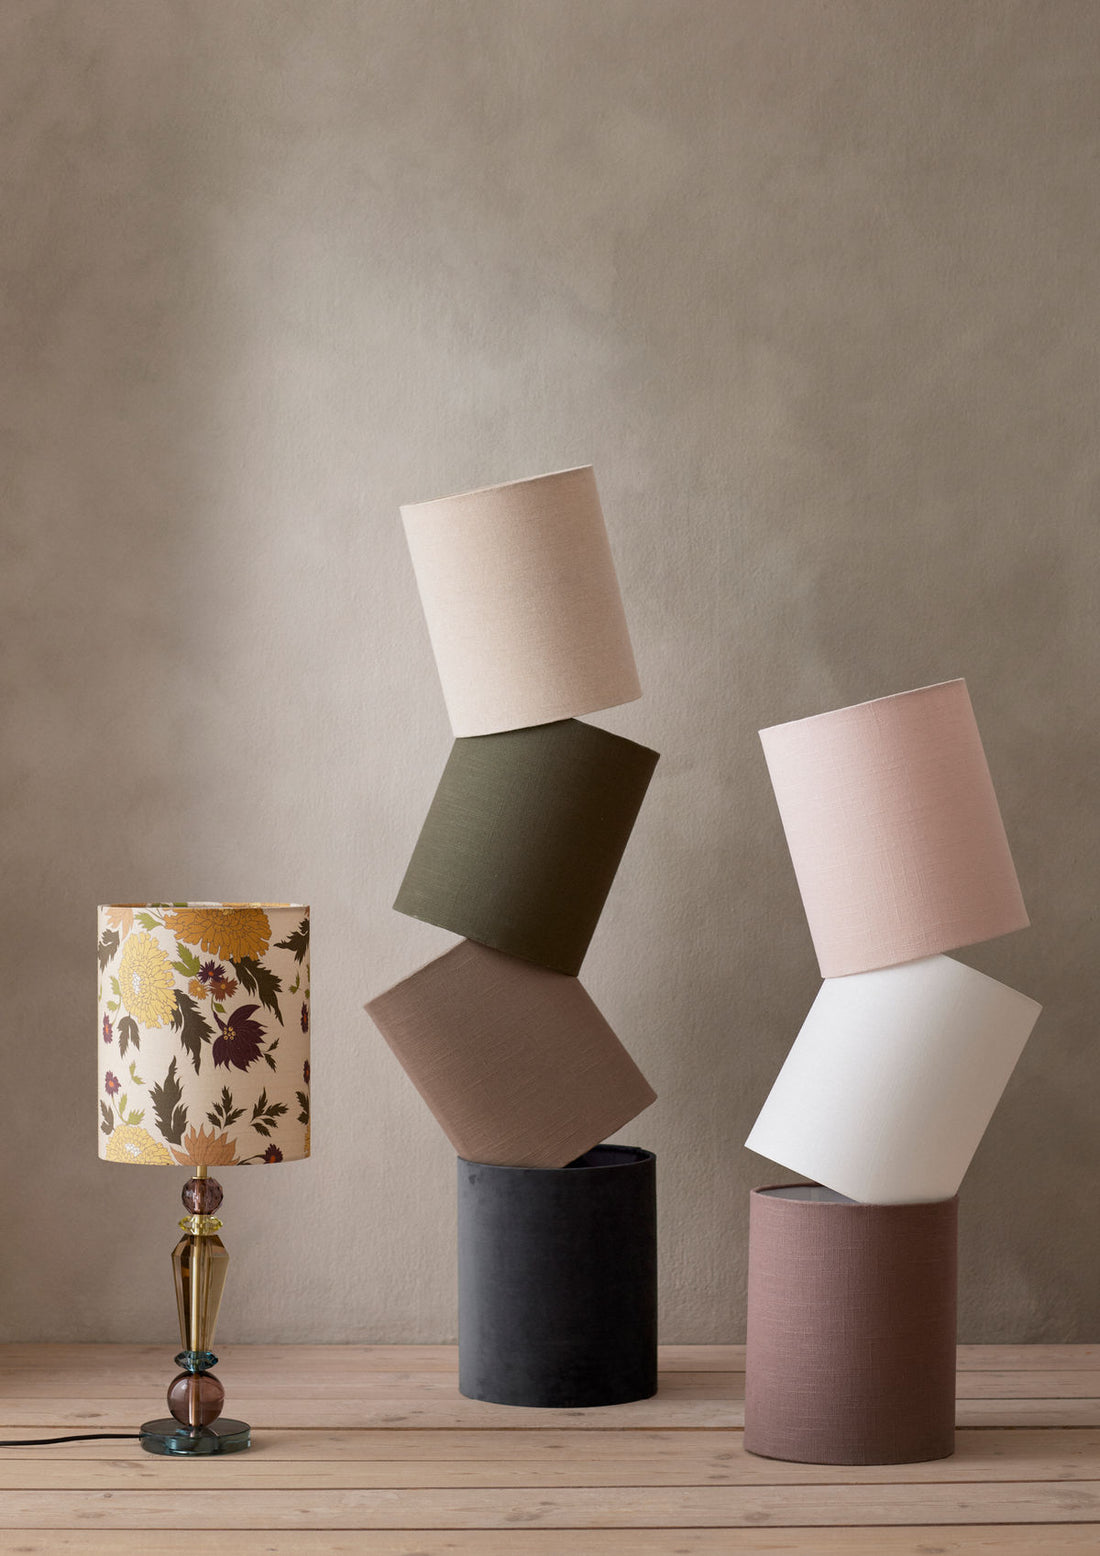 Mysigt levande Gertrud Lampshade - Chambray Sand